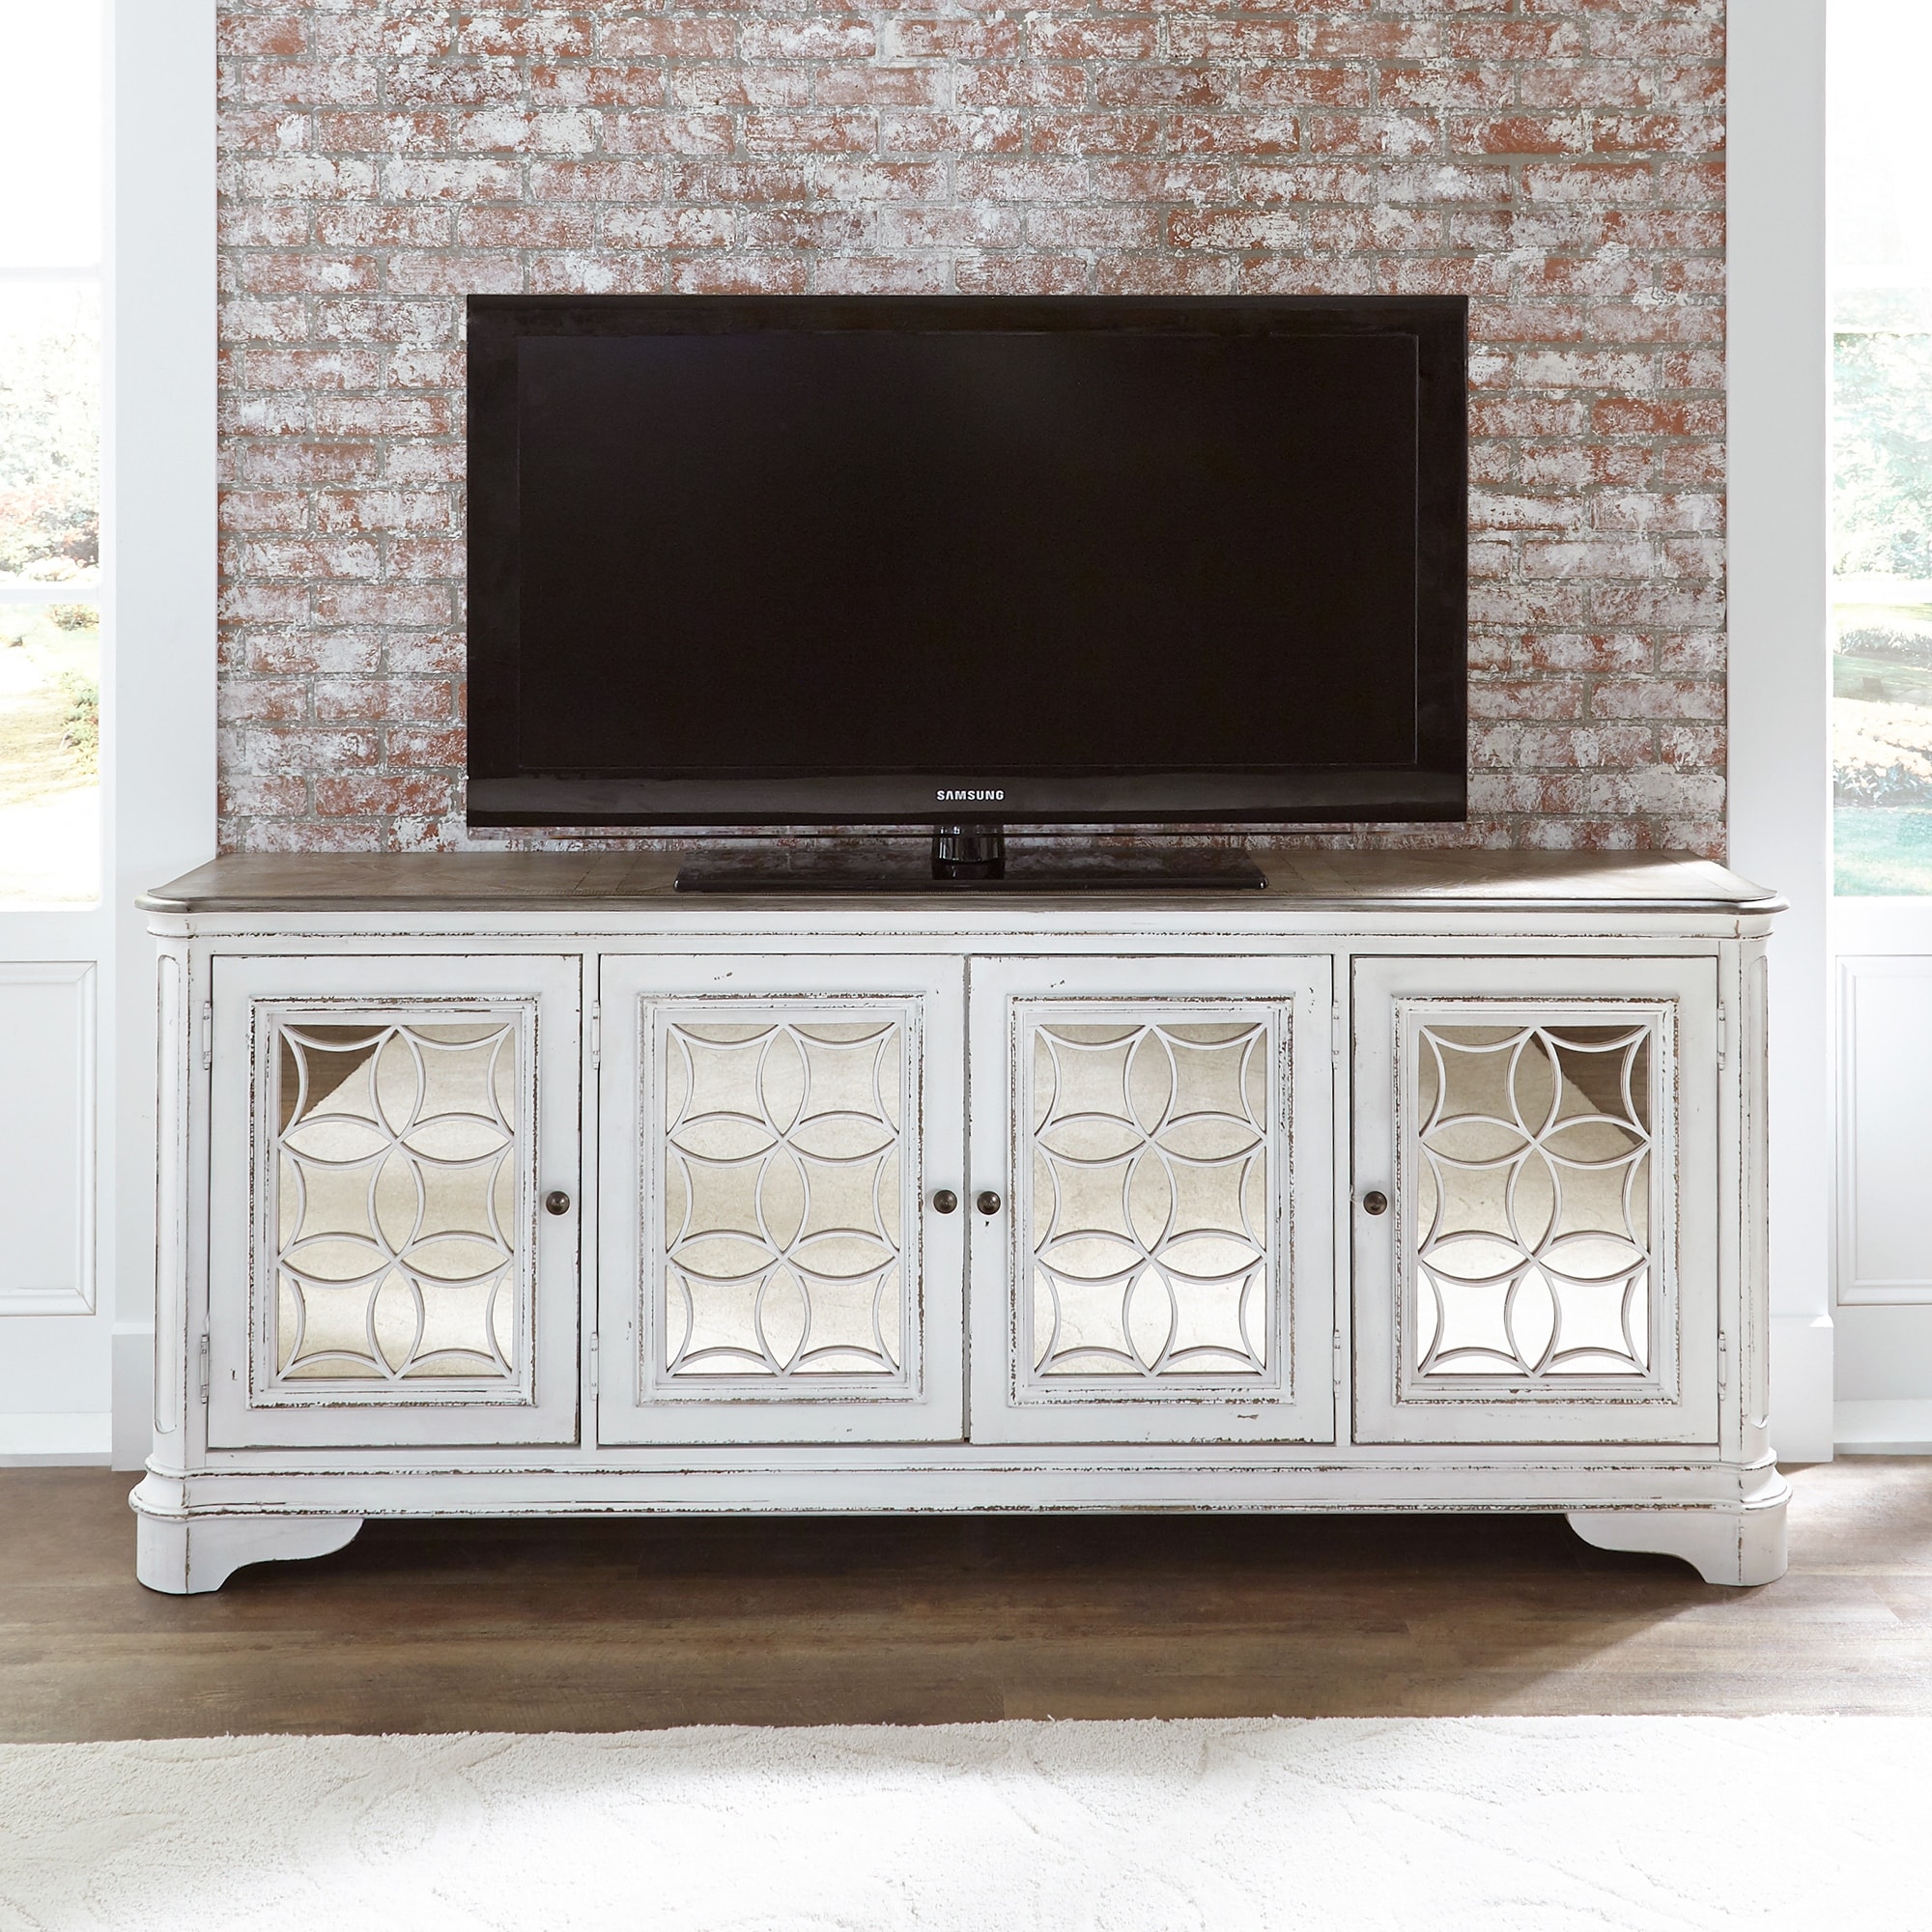 Traditional, Antique TV Stands - Bed Bath & Beyond